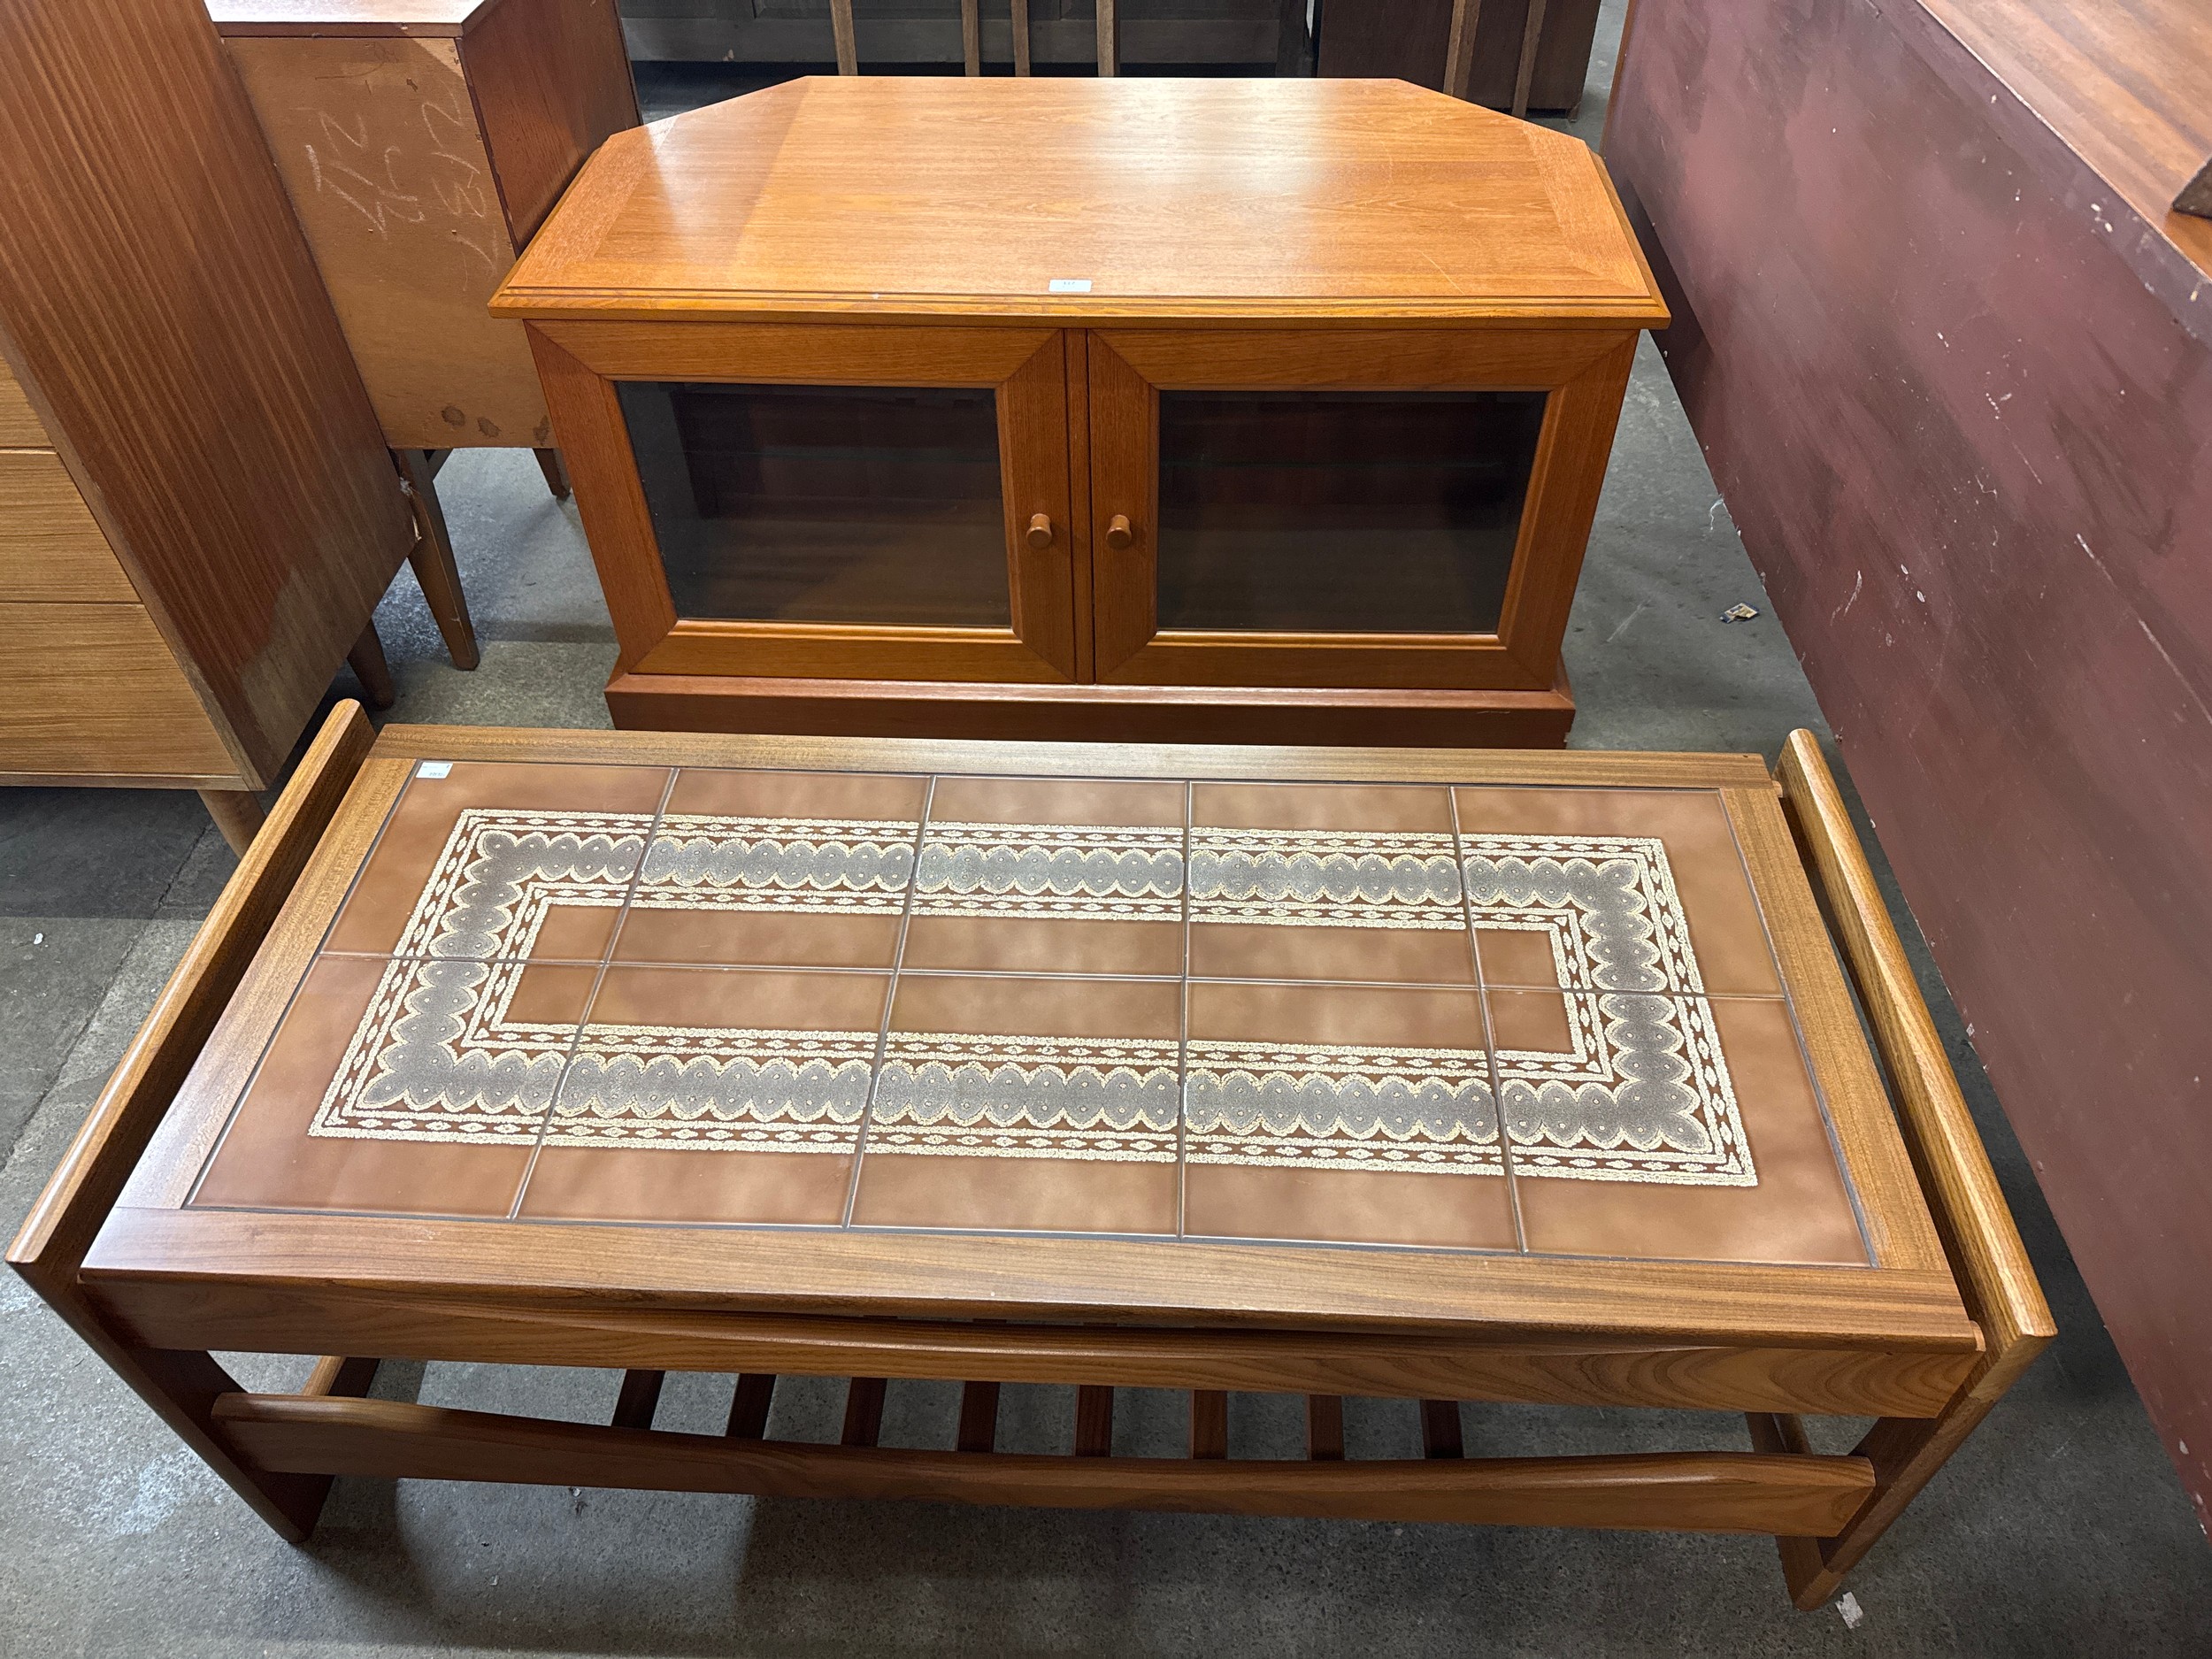 A teak and tiled top coffee table and a teak TV stand